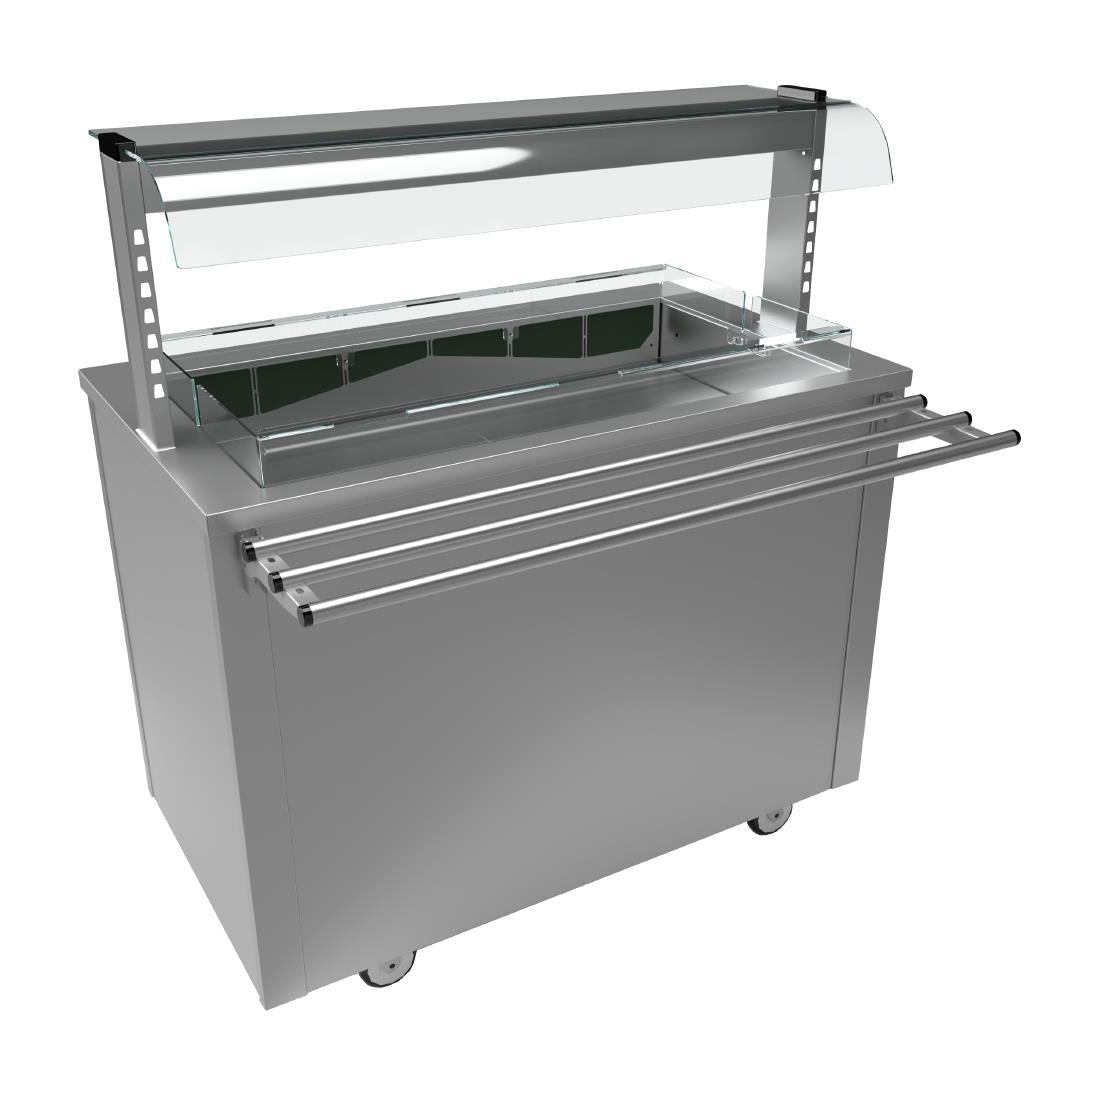 DR411 Moffat Versicarte Plus Cold Food Service Counter VCRW3 JD Catering Equipment Solutions Ltd